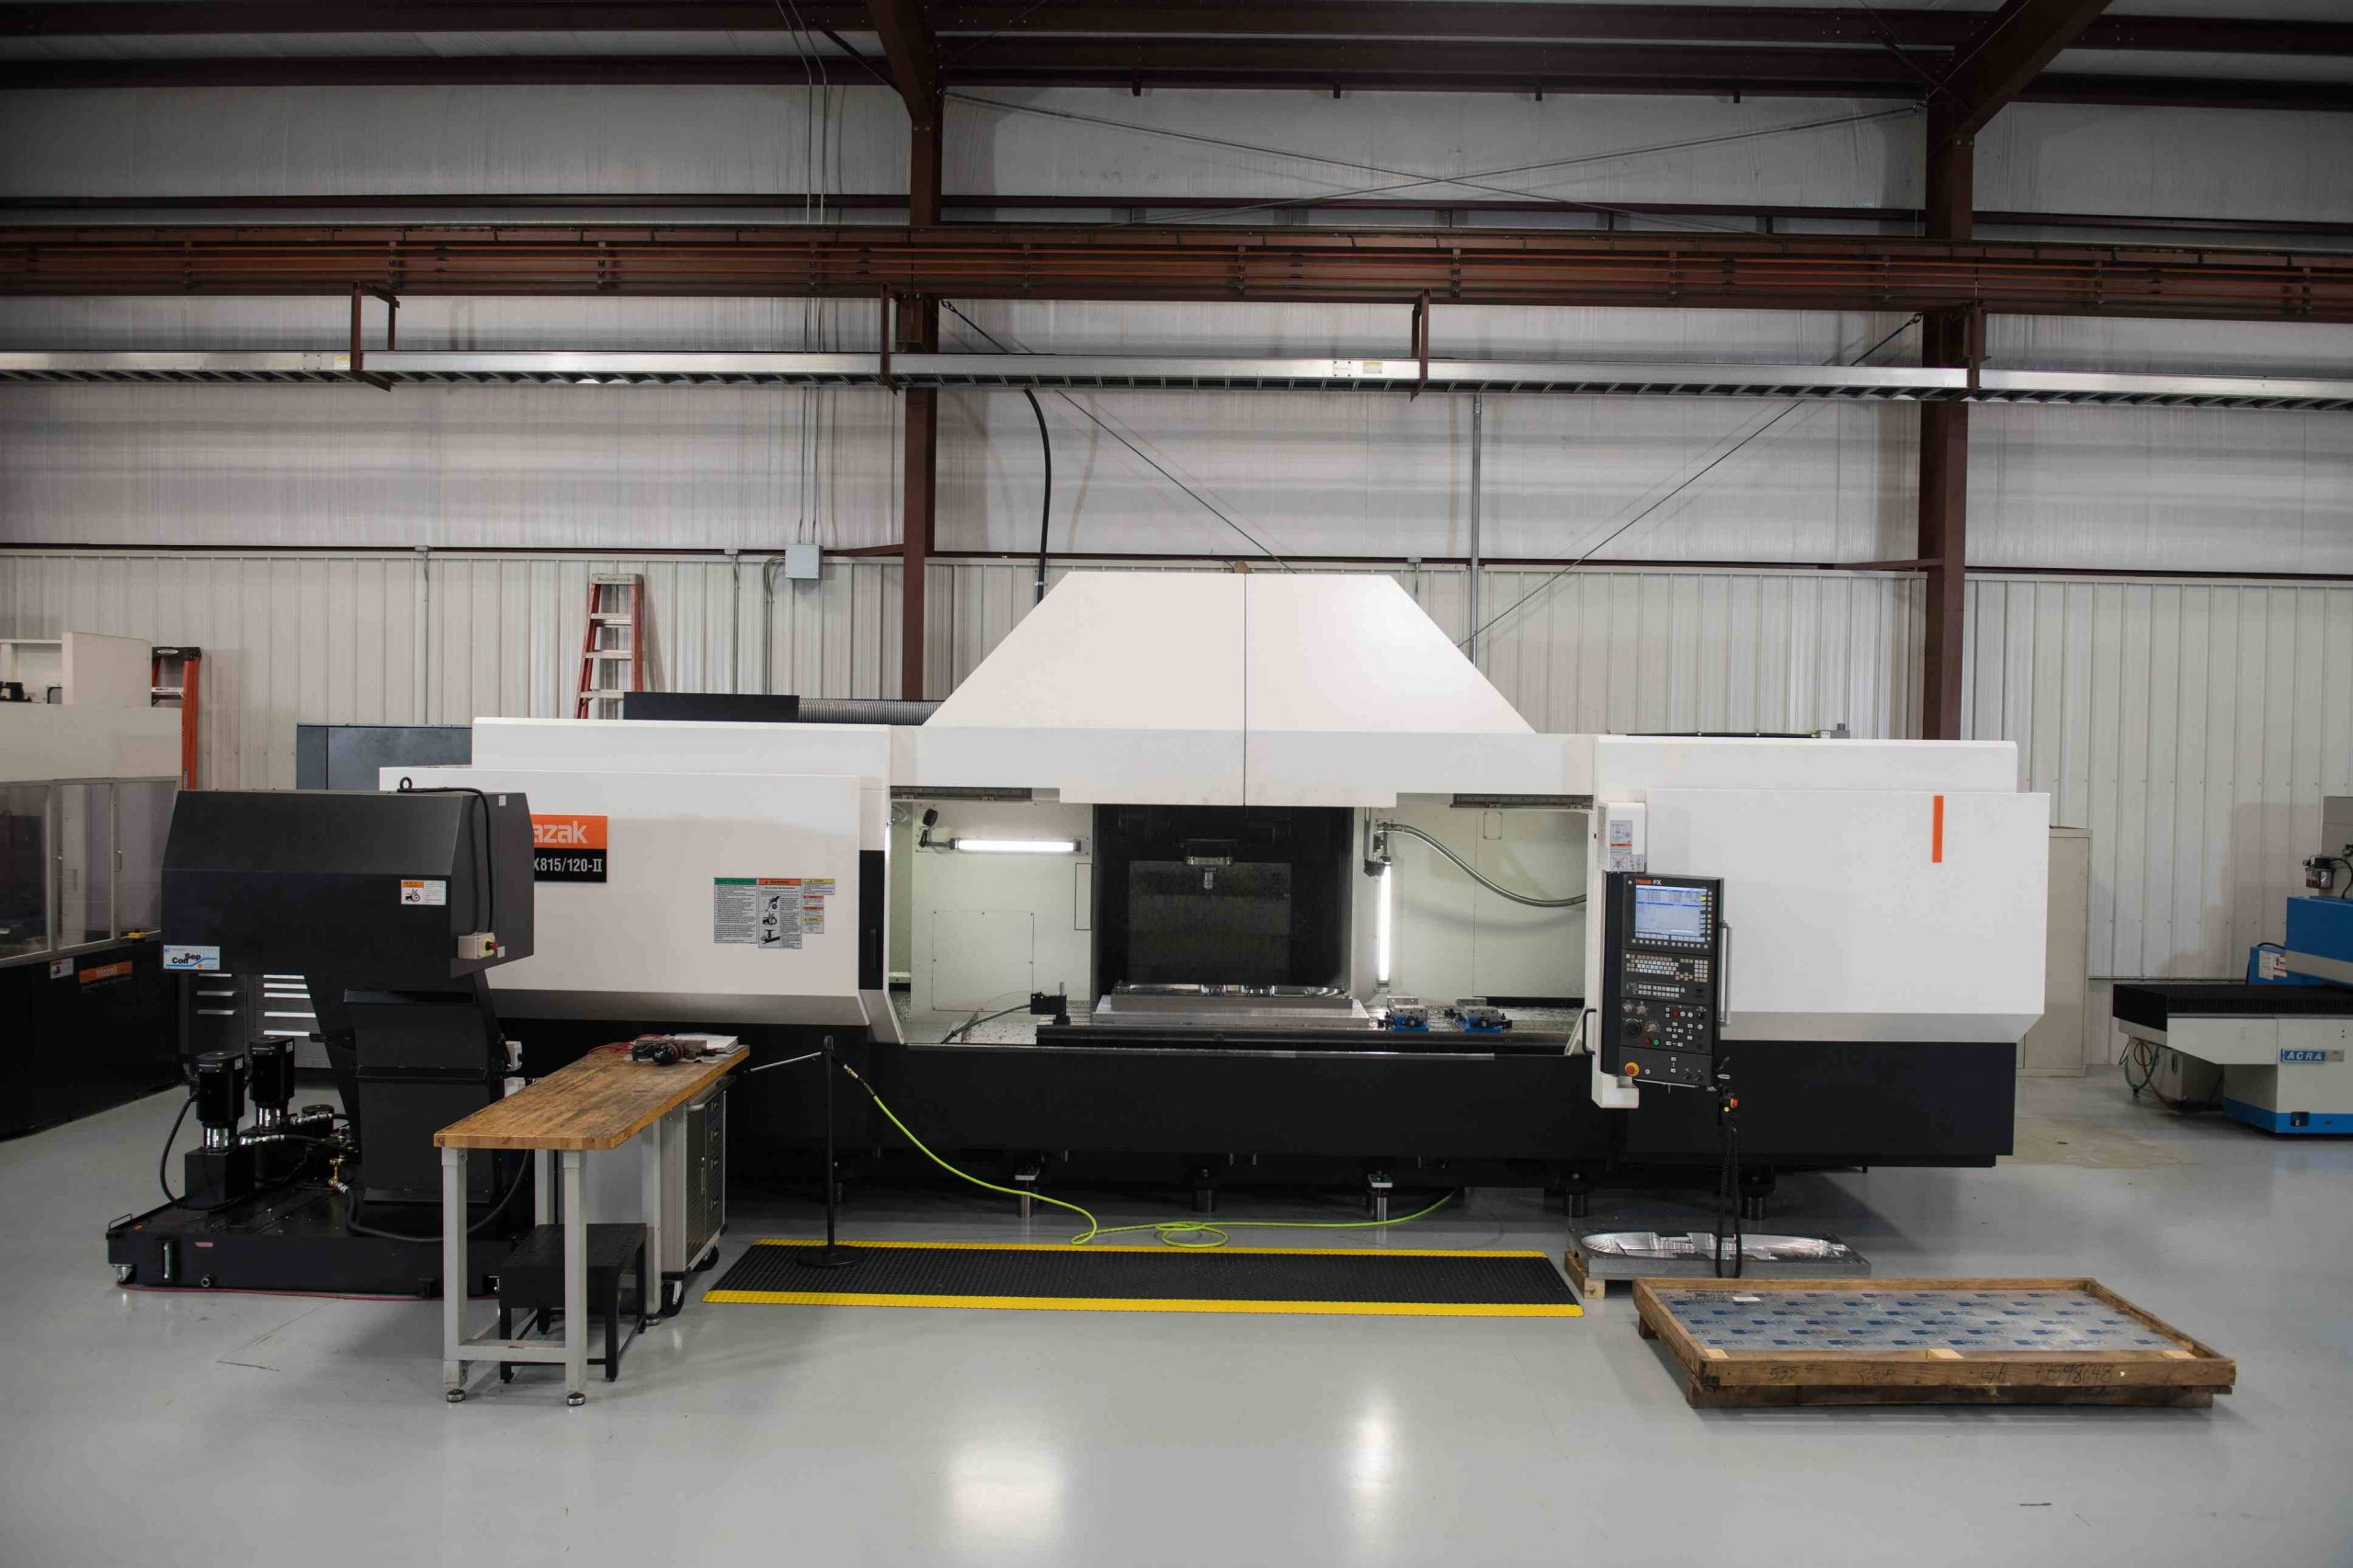 Aerotech Machining enhances its productivity and parts capability to include large, structural aerospace components and more with the addition of the Mazak VORTEX 815-120